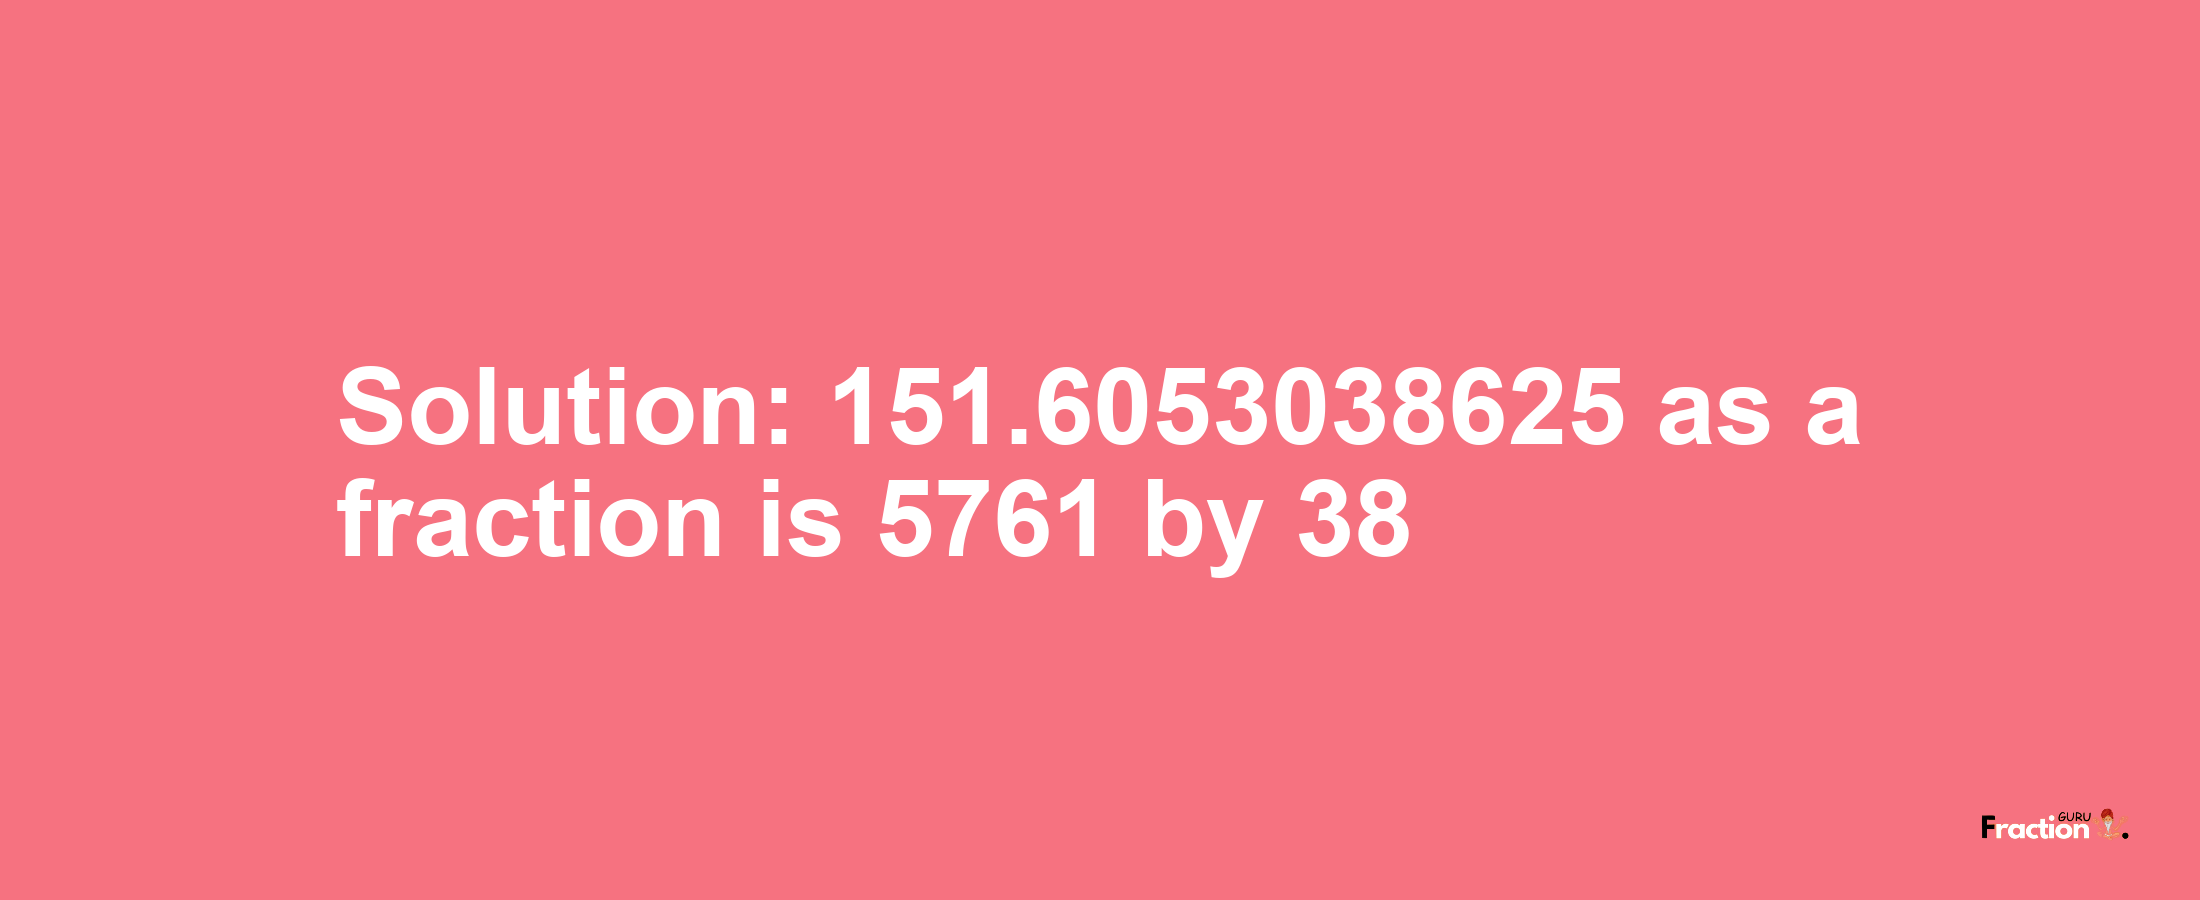 Solution:151.6053038625 as a fraction is 5761/38